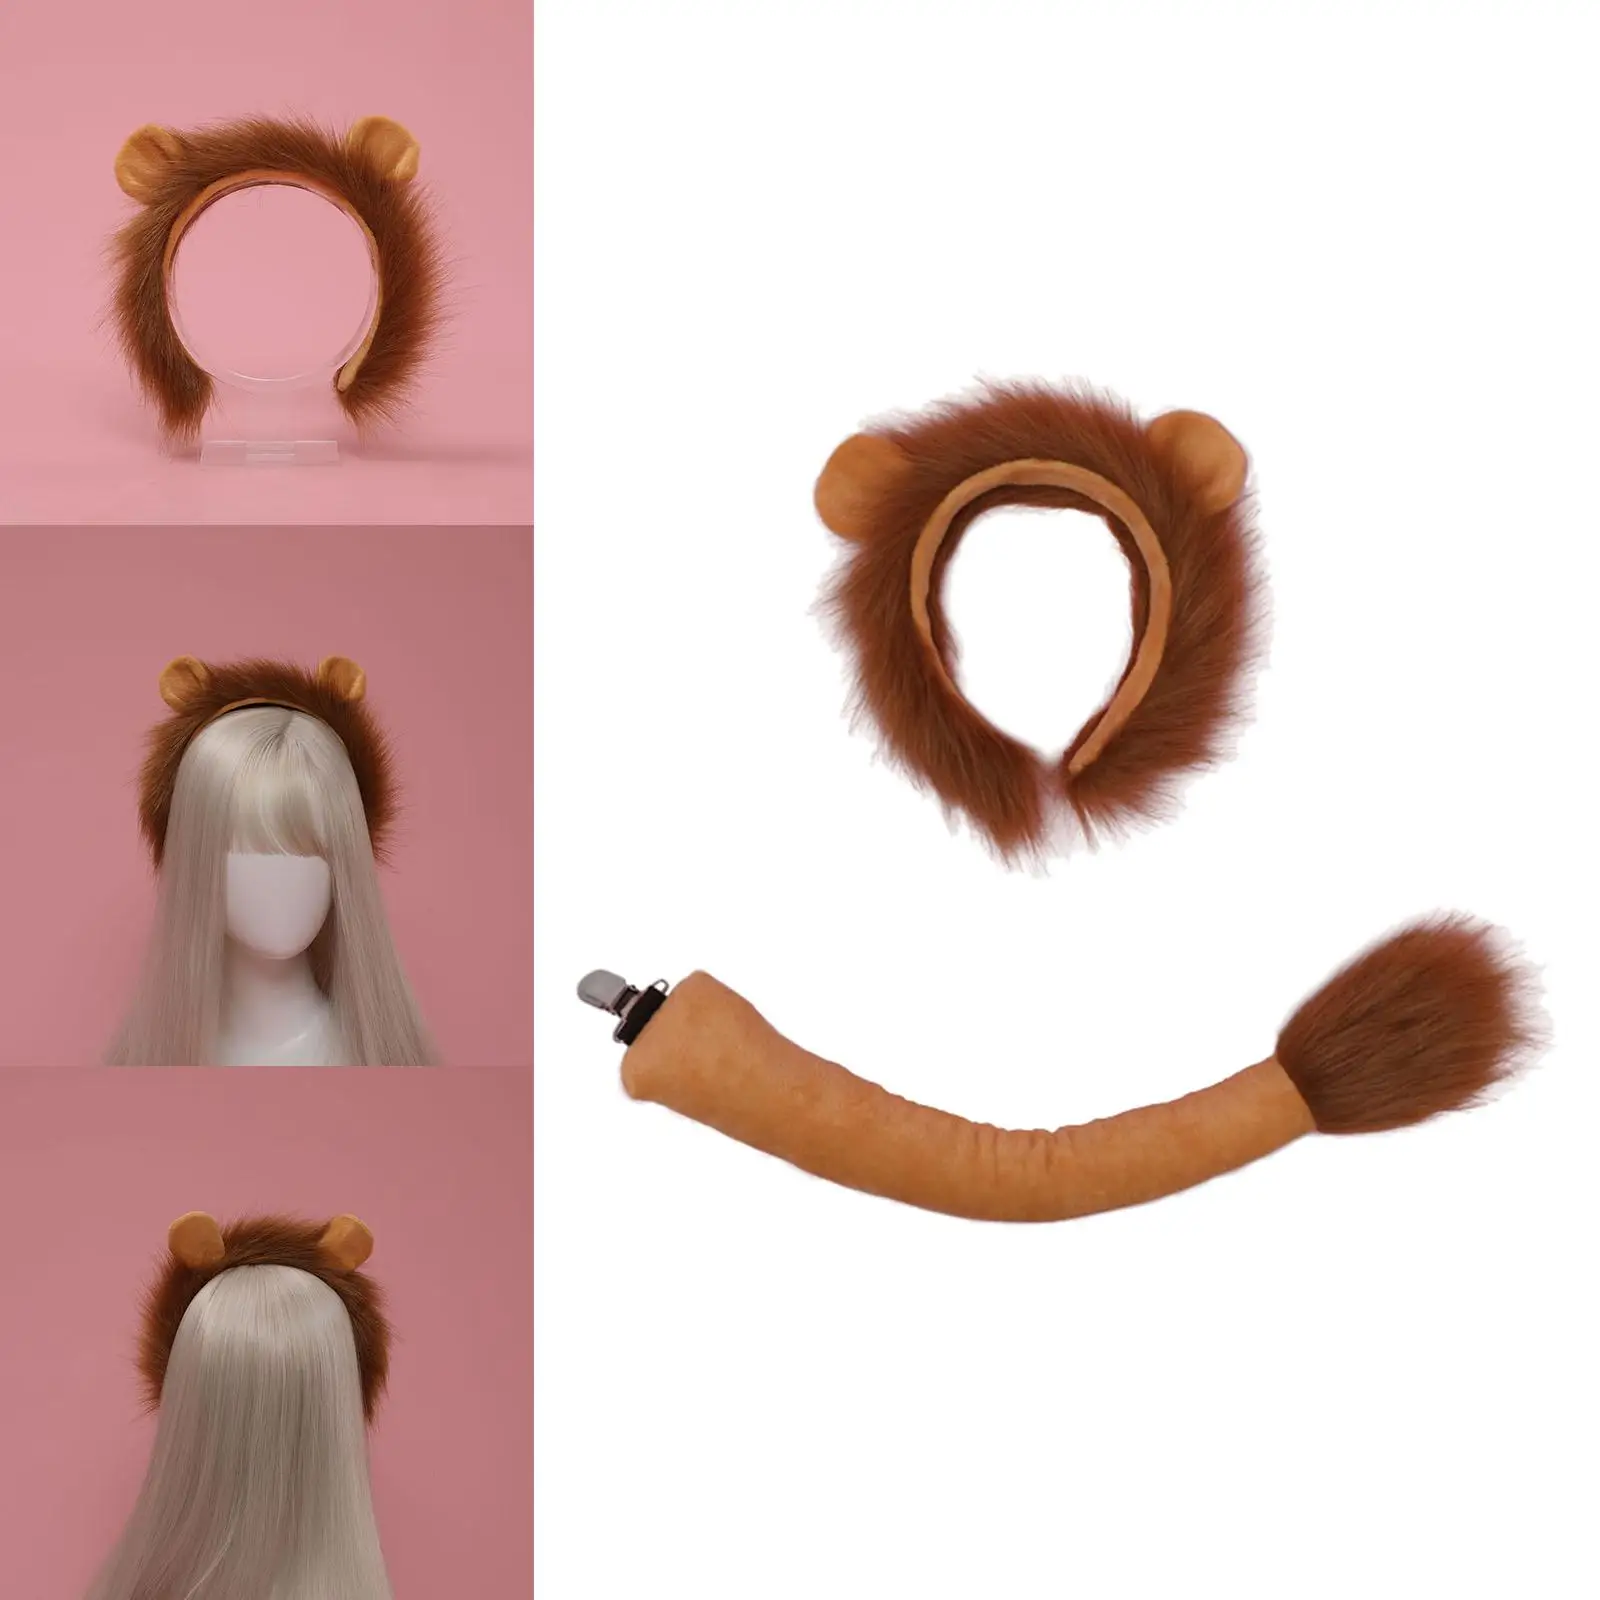  Tail Ears Costume Plush Headband Cosplay for Adult Children Teenager Show Carnival